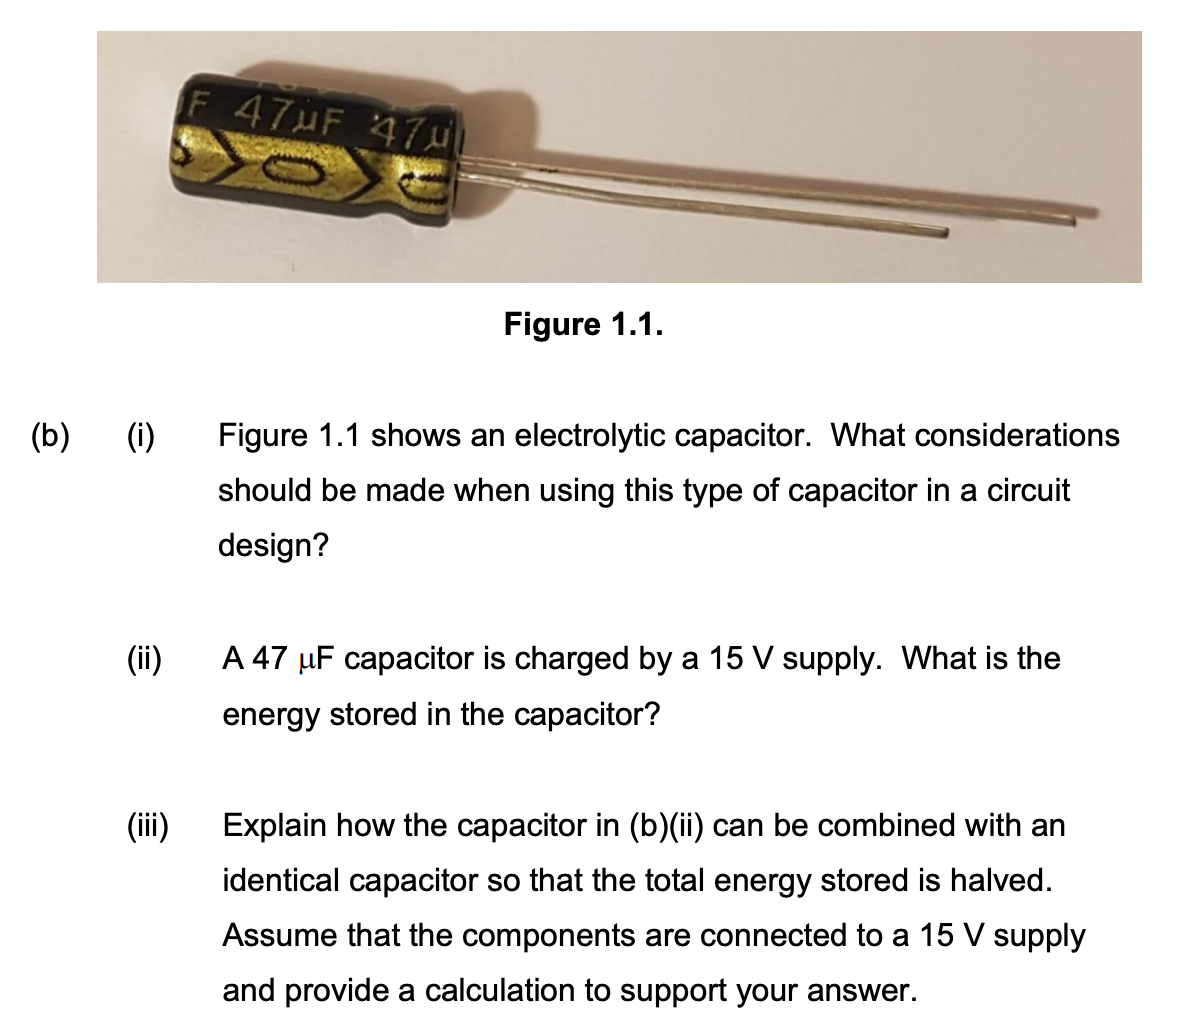 (b) (i)
(ii)
(iii)
F 47MF 474
Figure 1.1.
Figure 1.1 shows an electrolytic capacitor. What considerations
should be made when using this type of capacitor in a circuit
design?
A 47 μF capacitor is charged by a 15 V supply. What is the
energy stored in the capacitor?
Explain how the capacitor in (b)(ii) can be combined with an
identical capacitor so that the total energy stored is halved.
Assume that the components are connected to a 15 V supply
and provide a calculation to support your answer.